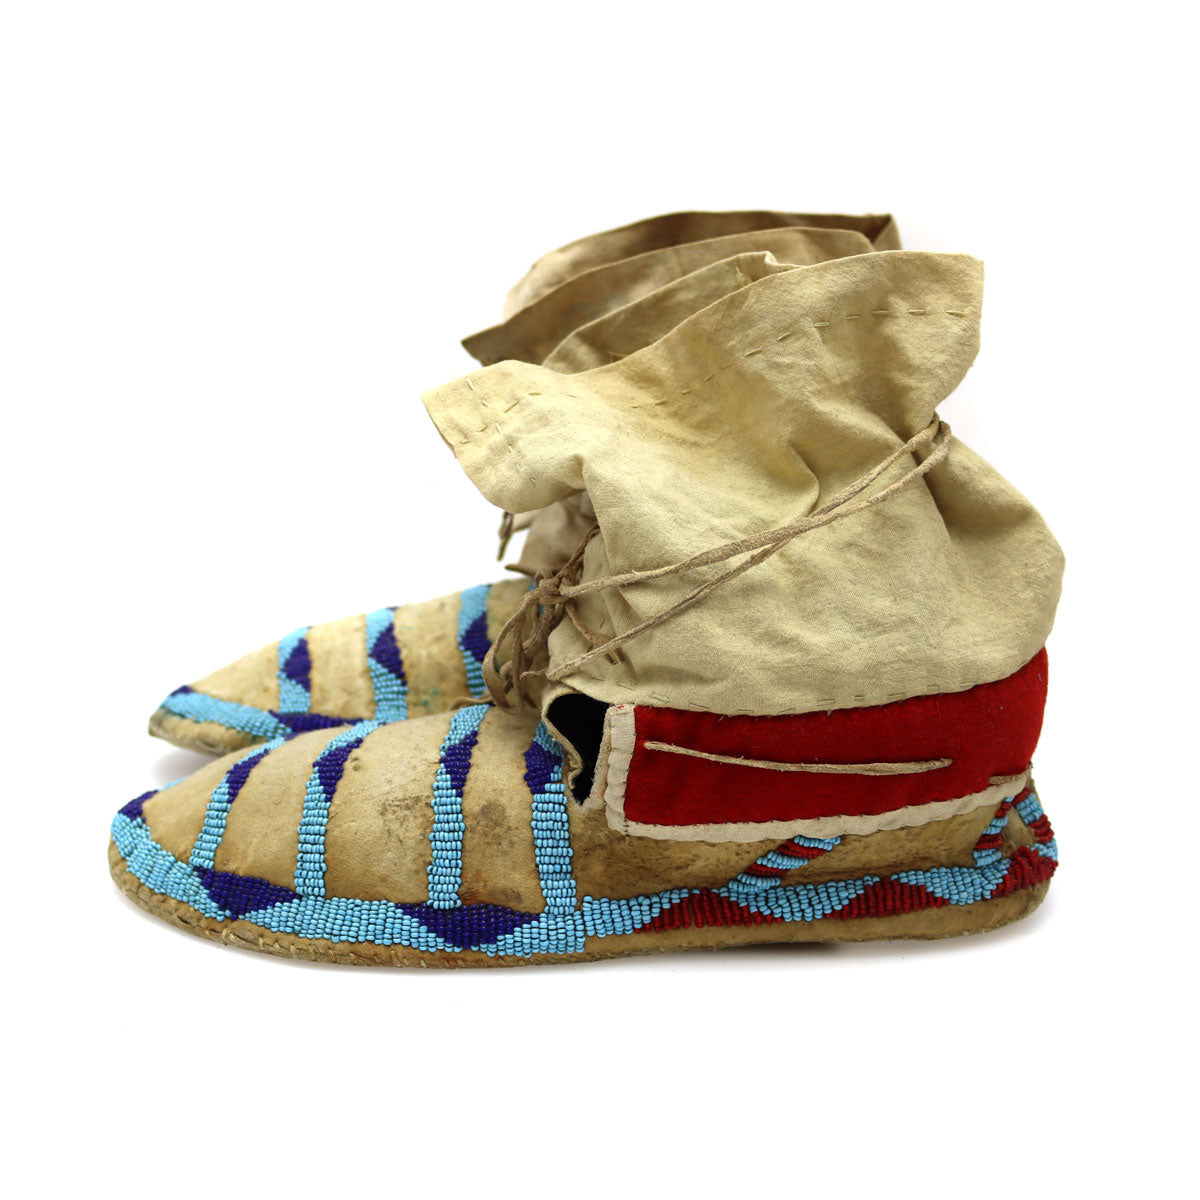 Blackfoot Leather Beaded Moccasins c. 1880-90s, 7" x 10" x 4" (DW92323A-0421-012) 2
